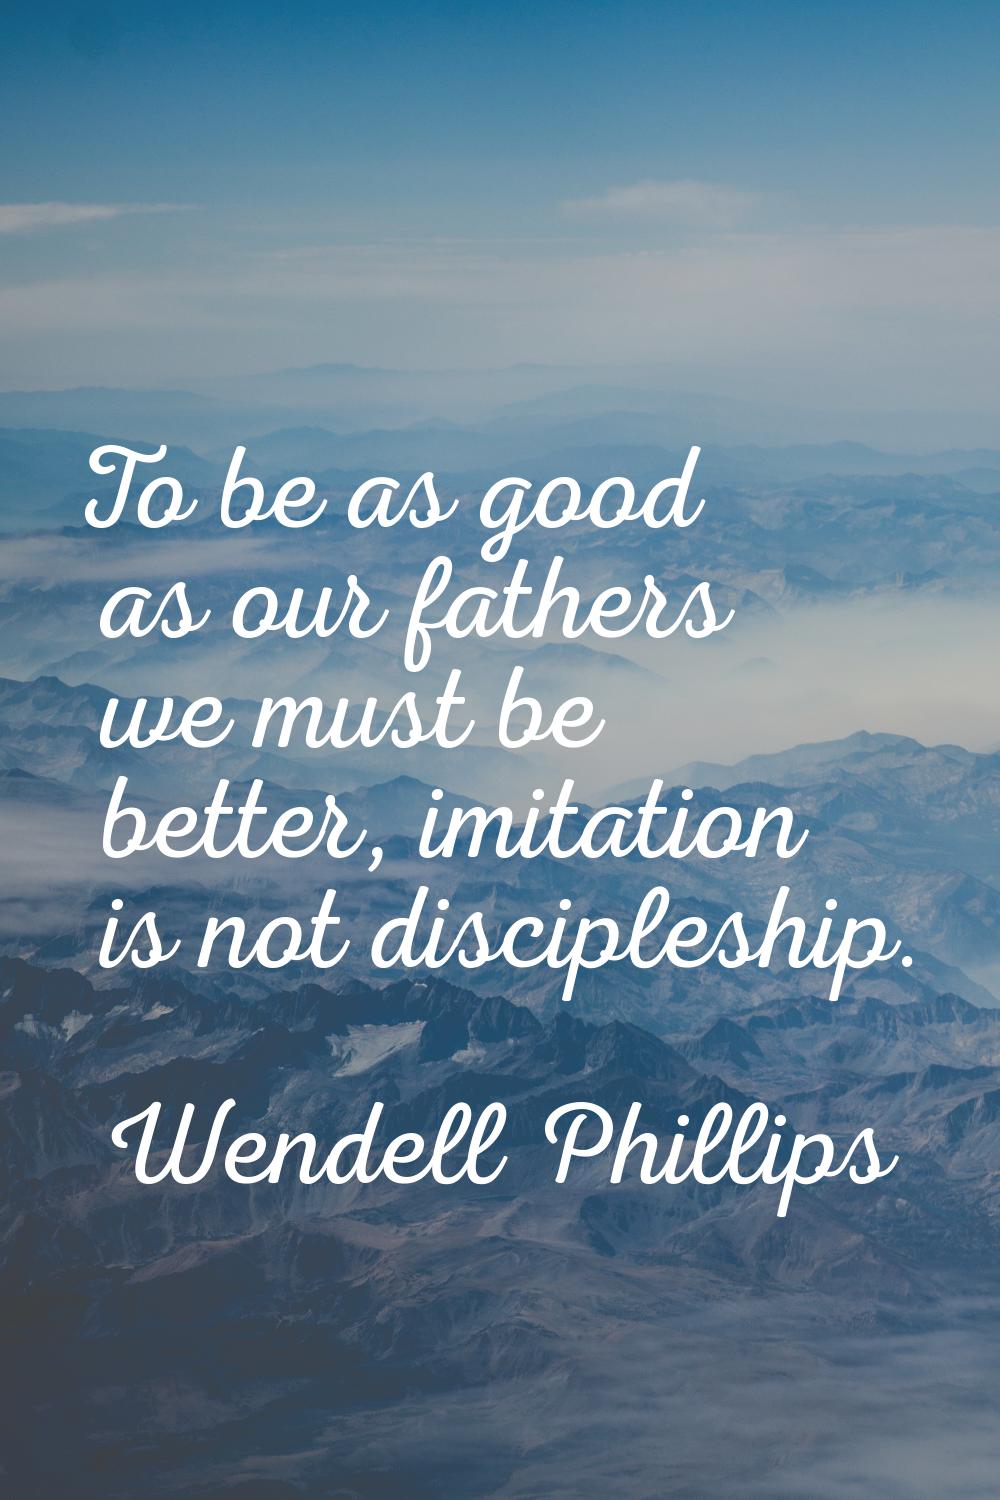 To be as good as our fathers we must be better, imitation is not discipleship.